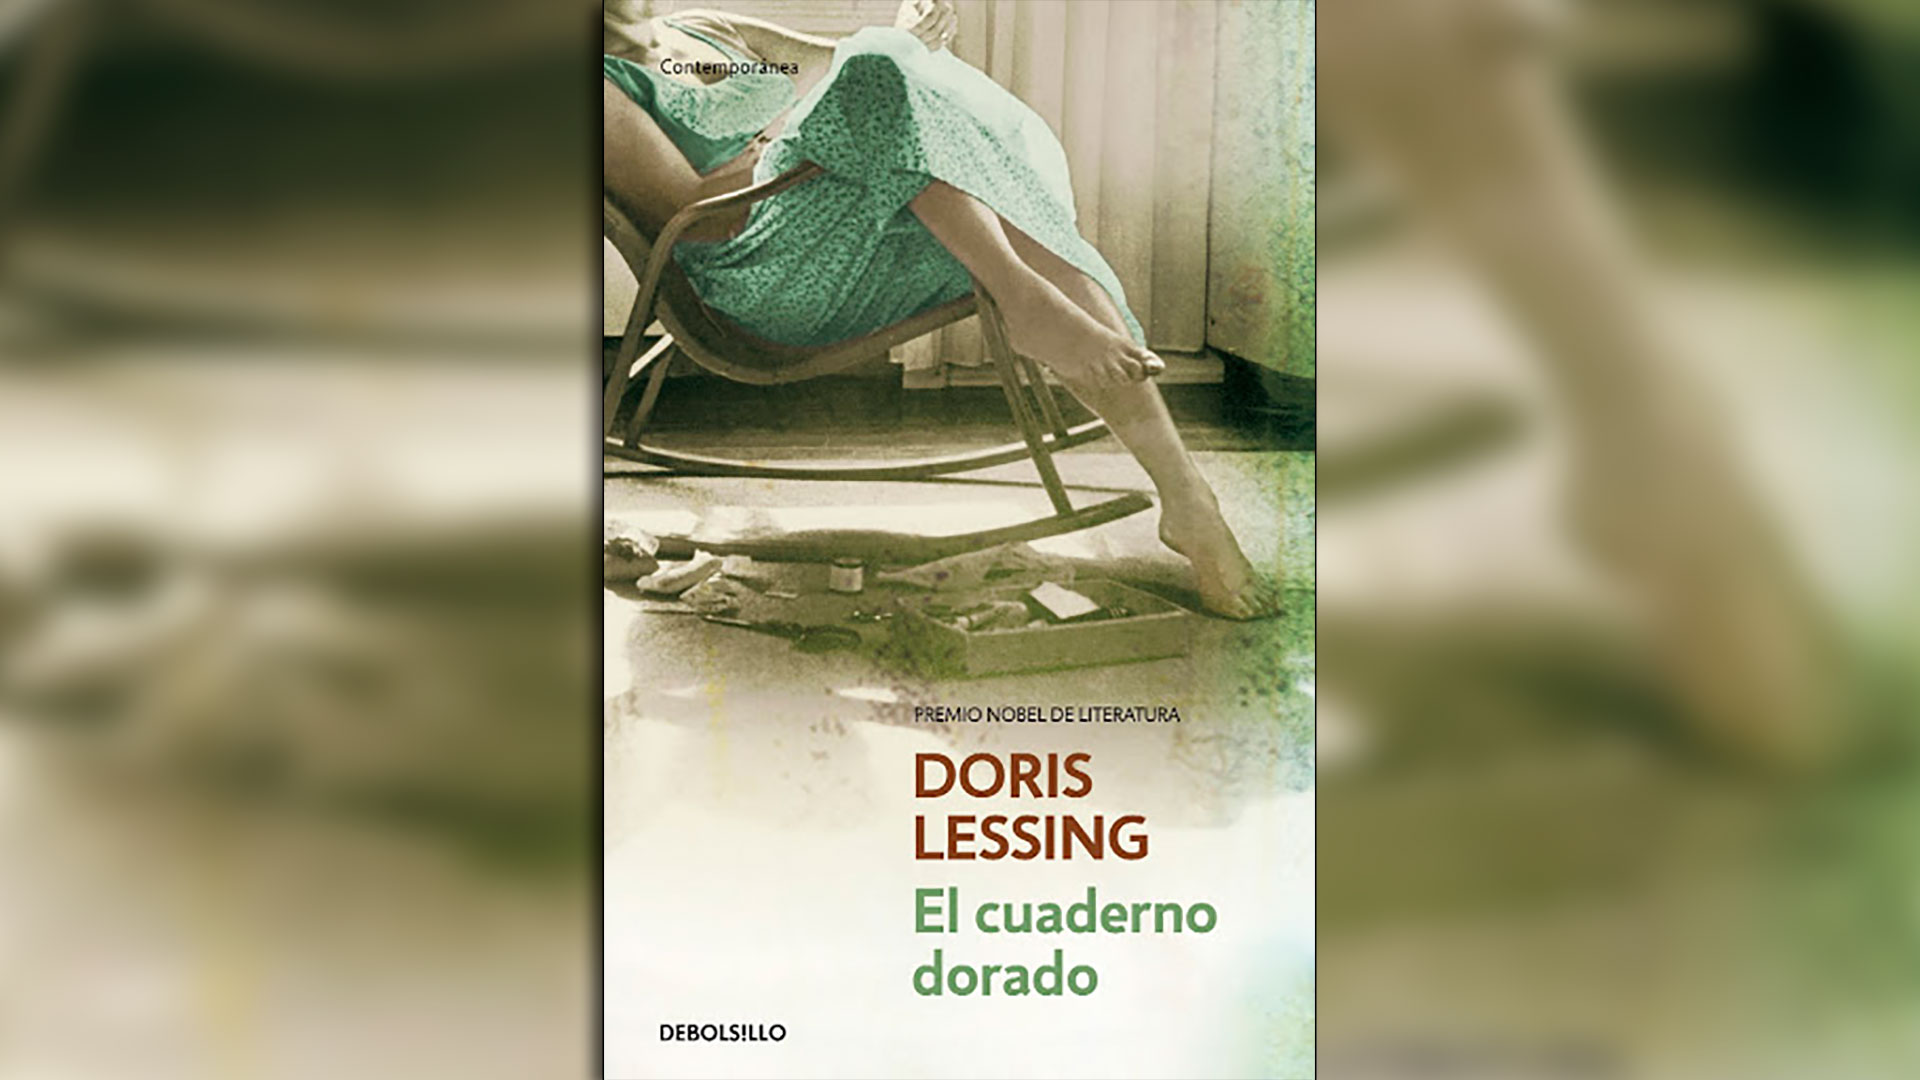 book cover "the golden notebook"by Doris Lessing, in her DeBolsillo edition.